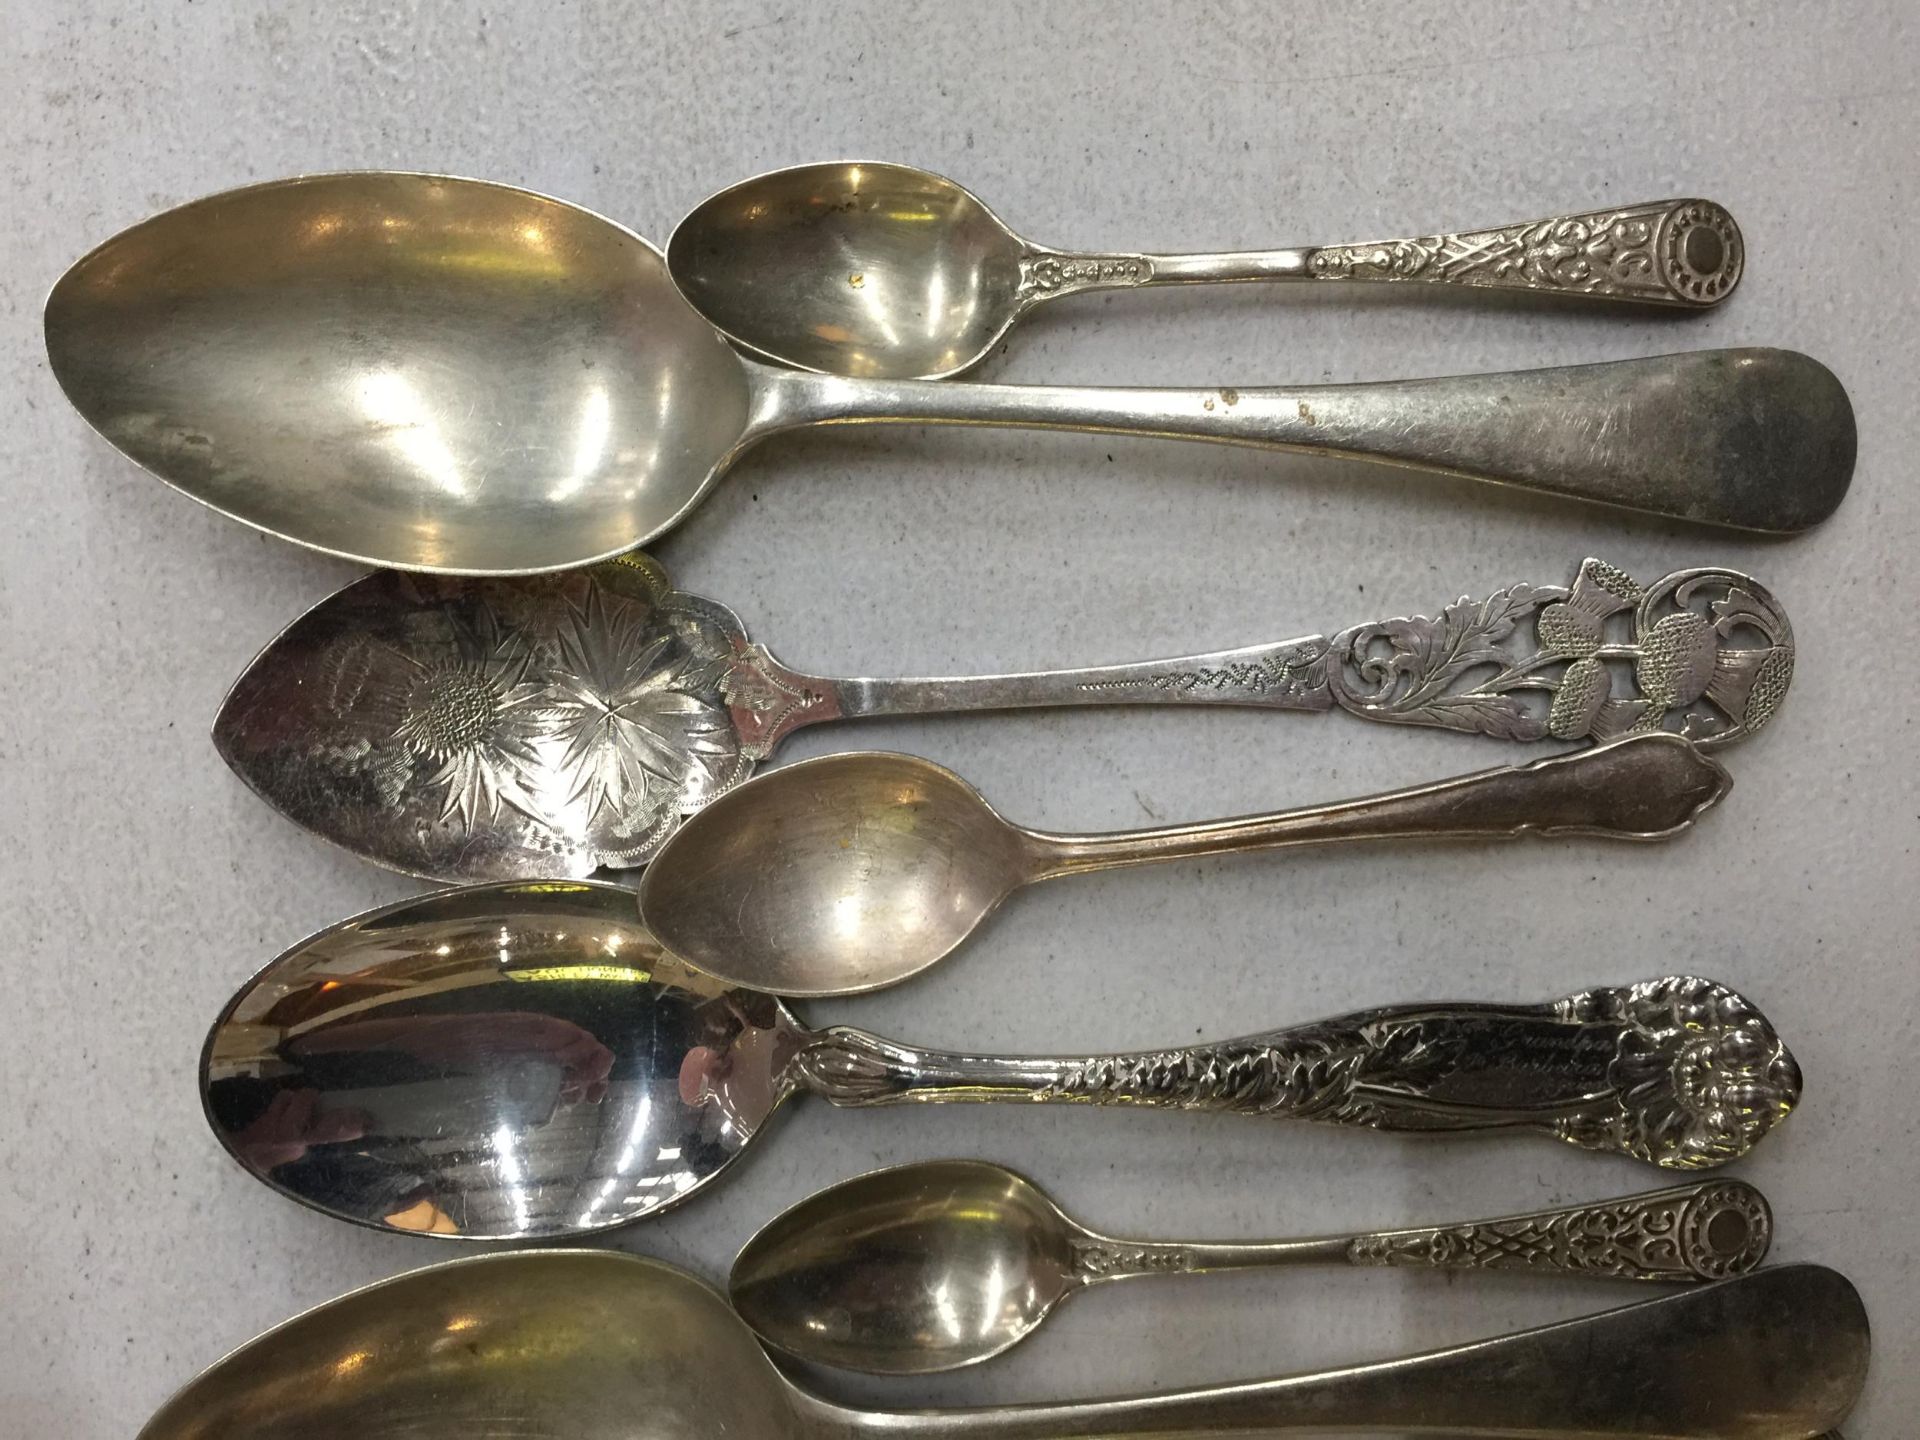 NINE VARIOUS SPOONS TO INCLUDE DECORATIVE SILVER PLATED EXAMPLES - Image 3 of 3